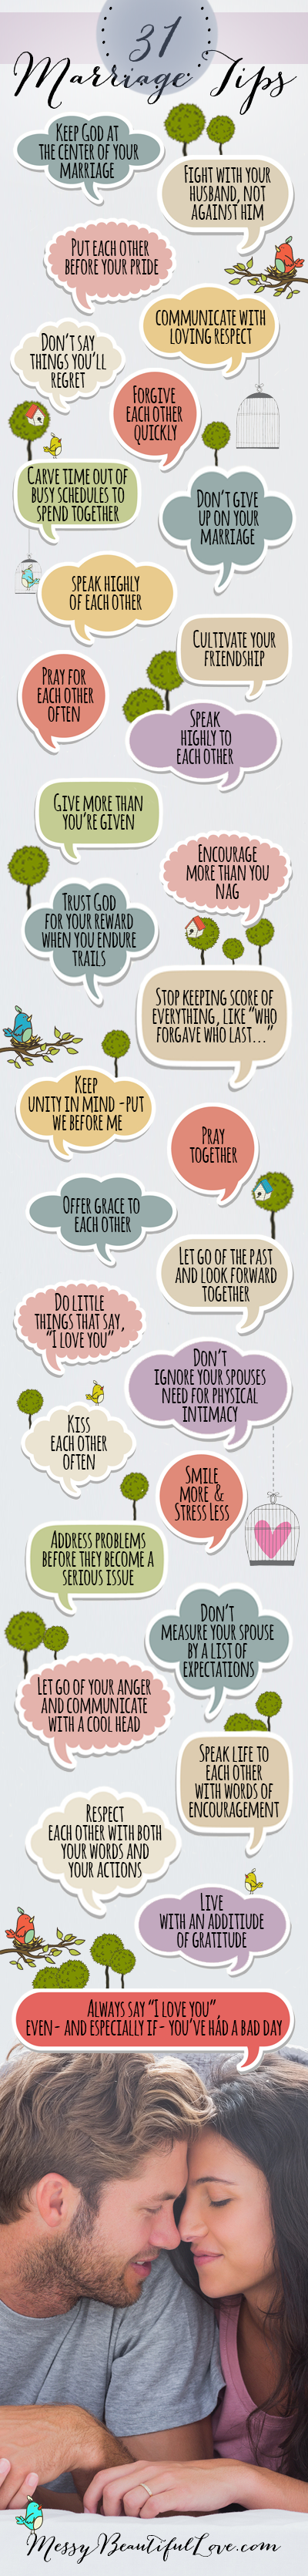 31 Marriage Tips! Maybe I can print out & put in a jar & we read one every day!